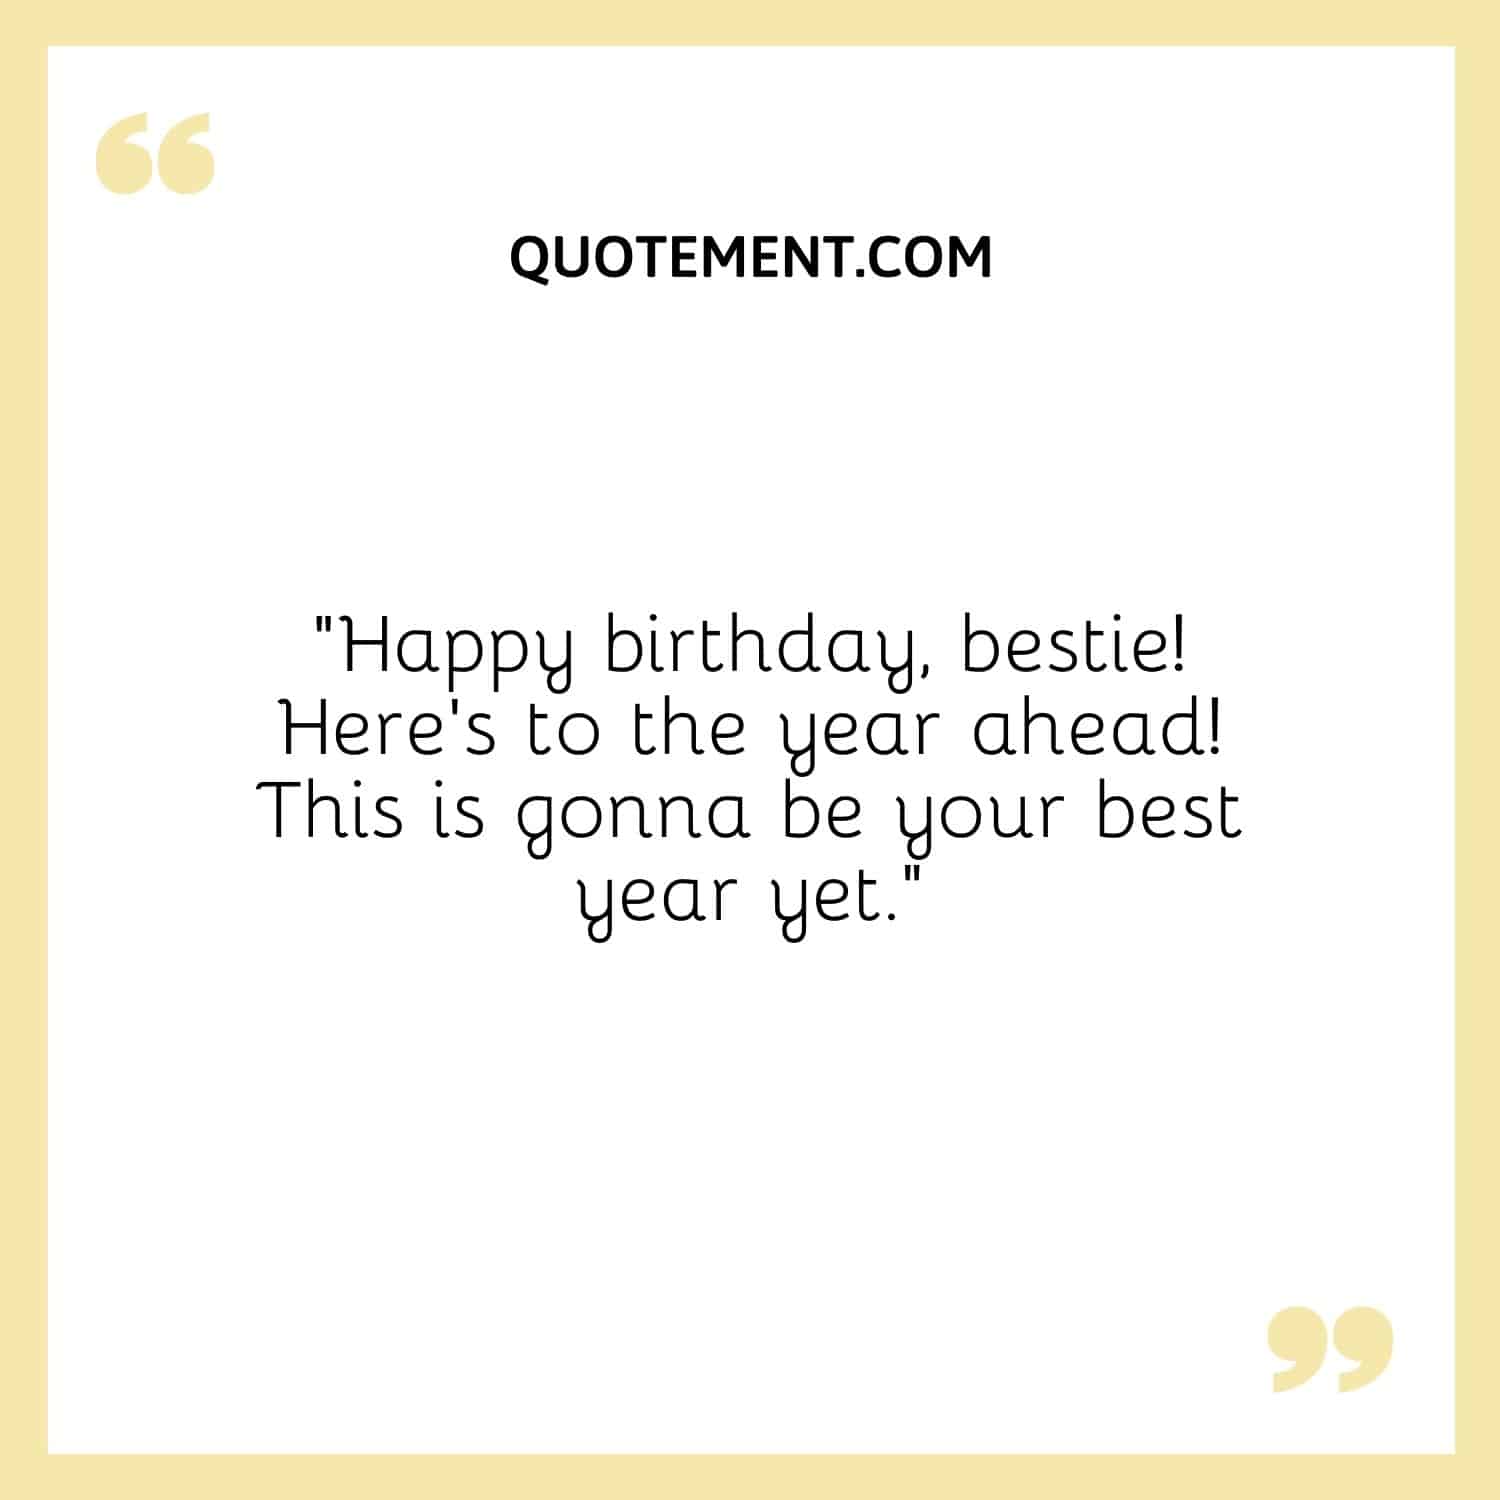 Here’s to the year ahead!